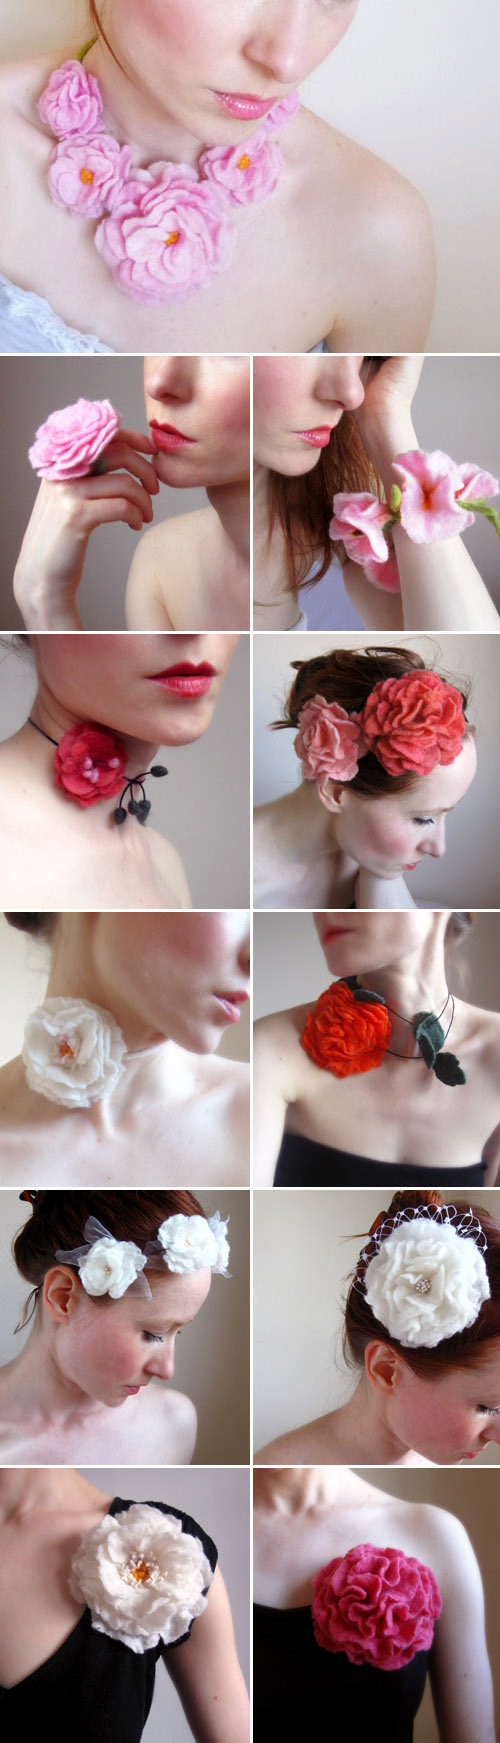 felt bridal hair accessories, flowers and jewlery by Crafts2Cherish on Etsy.com